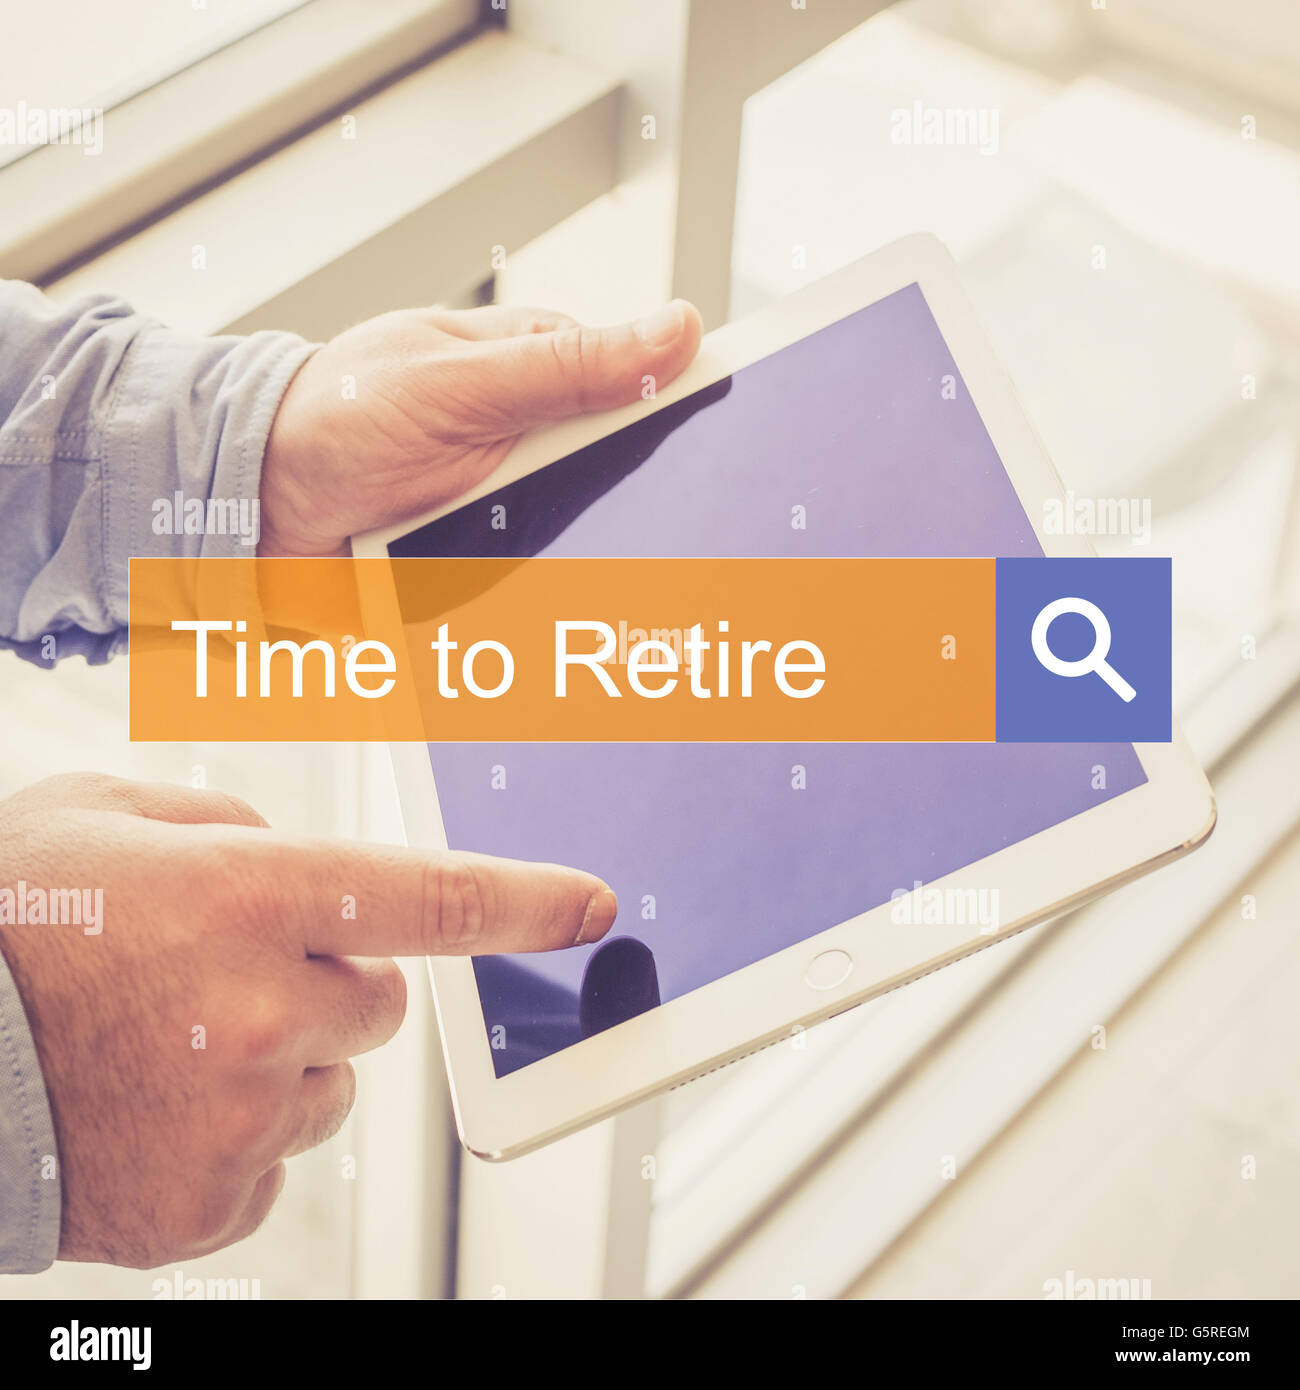 SEARCH TECHNOLOGY COMMUNICATION  Time To Retire TABLET FINDING CONCEPT Stock Photo